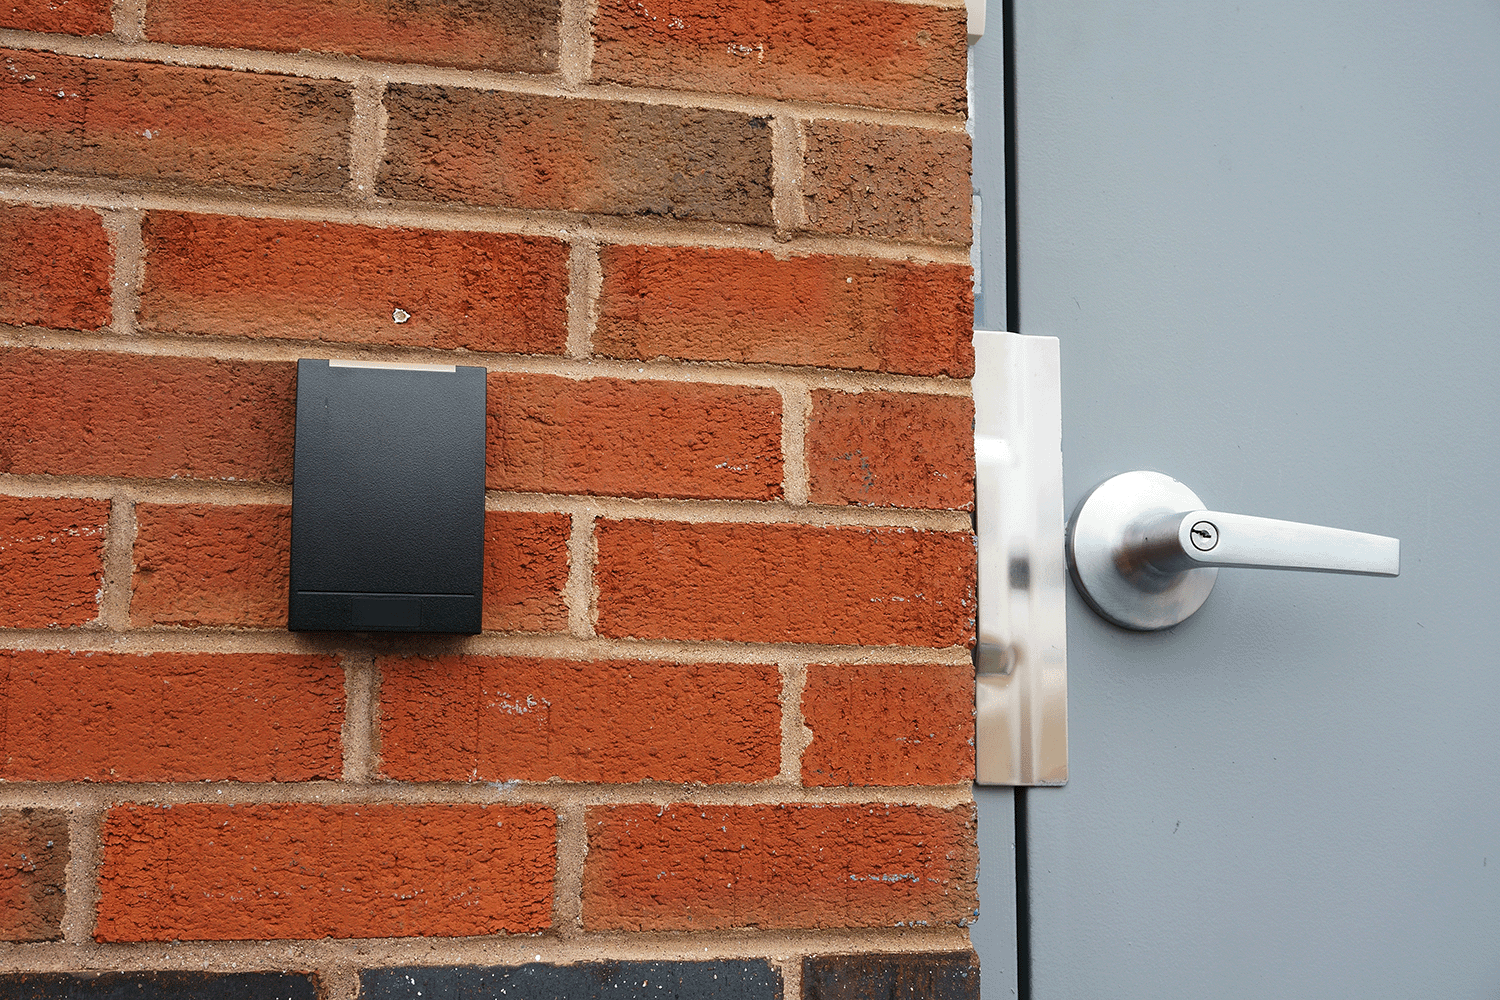  Access Control Solutions